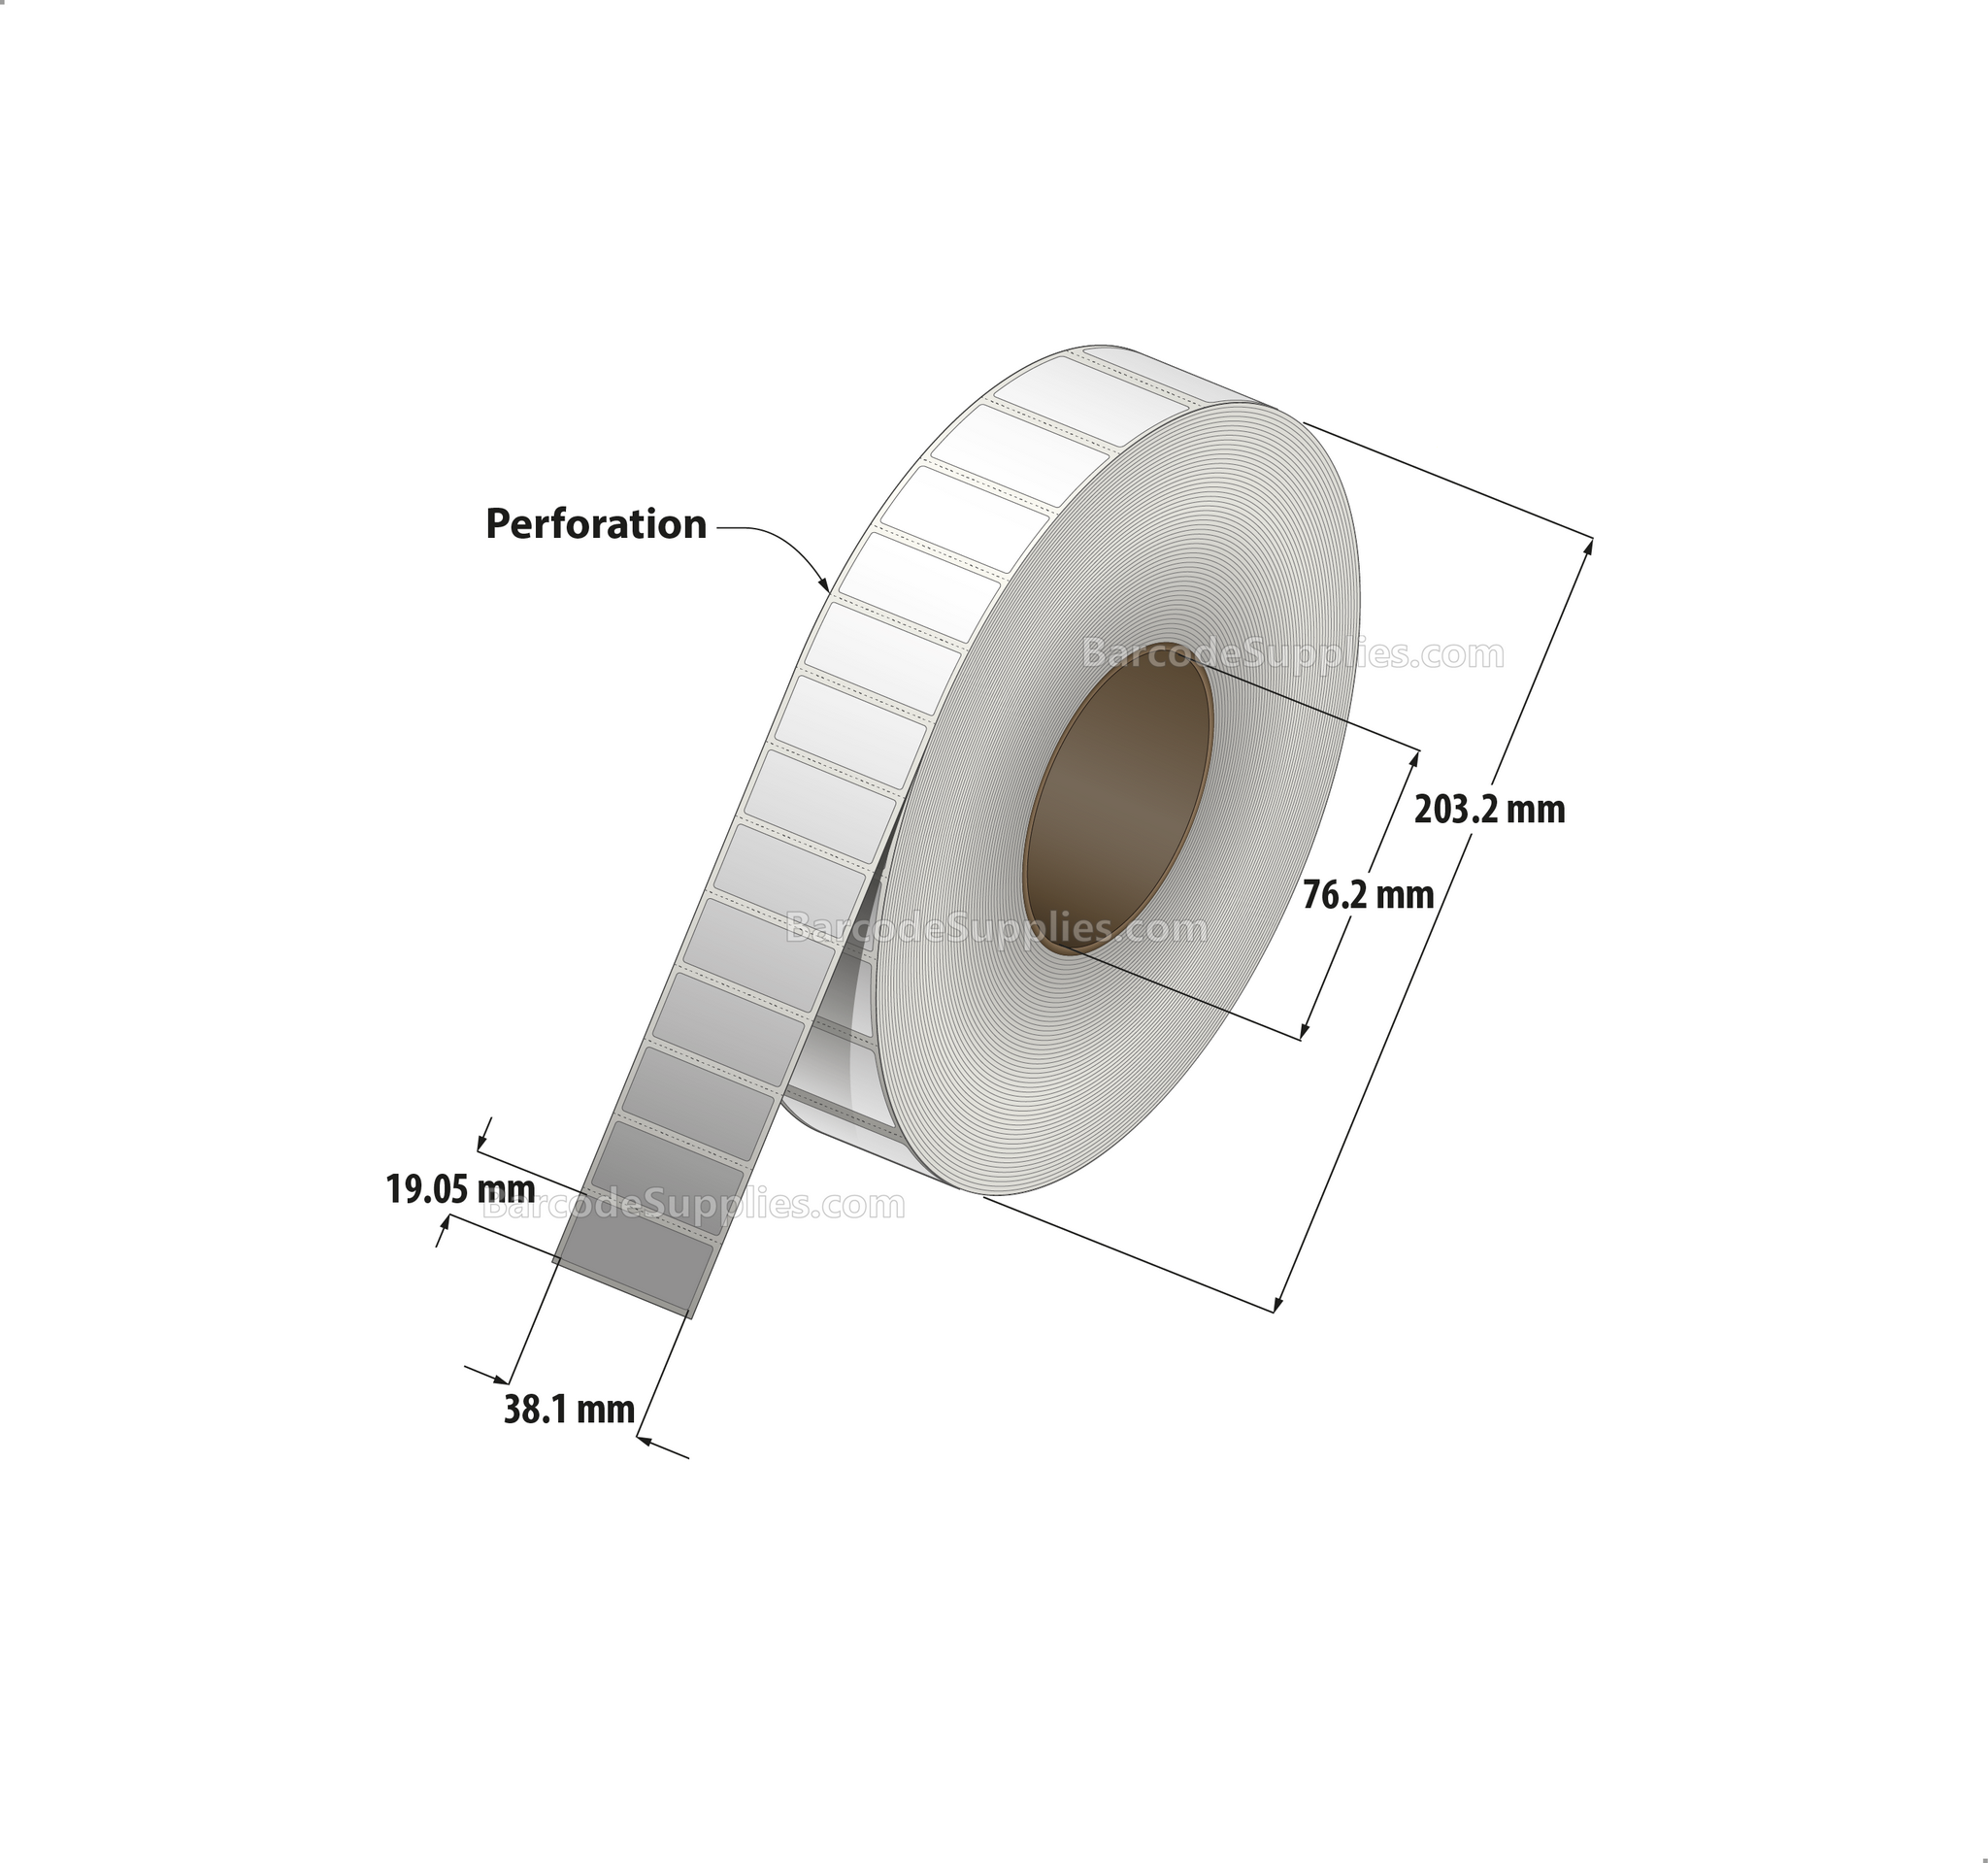 1.5 x 0.75 Thermal Transfer White Labels With Permanent Adhesive - Perforated - 7500 Labels Per Roll - Carton Of 8 Rolls - 60000 Labels Total - MPN: RP-15-075-7500-3